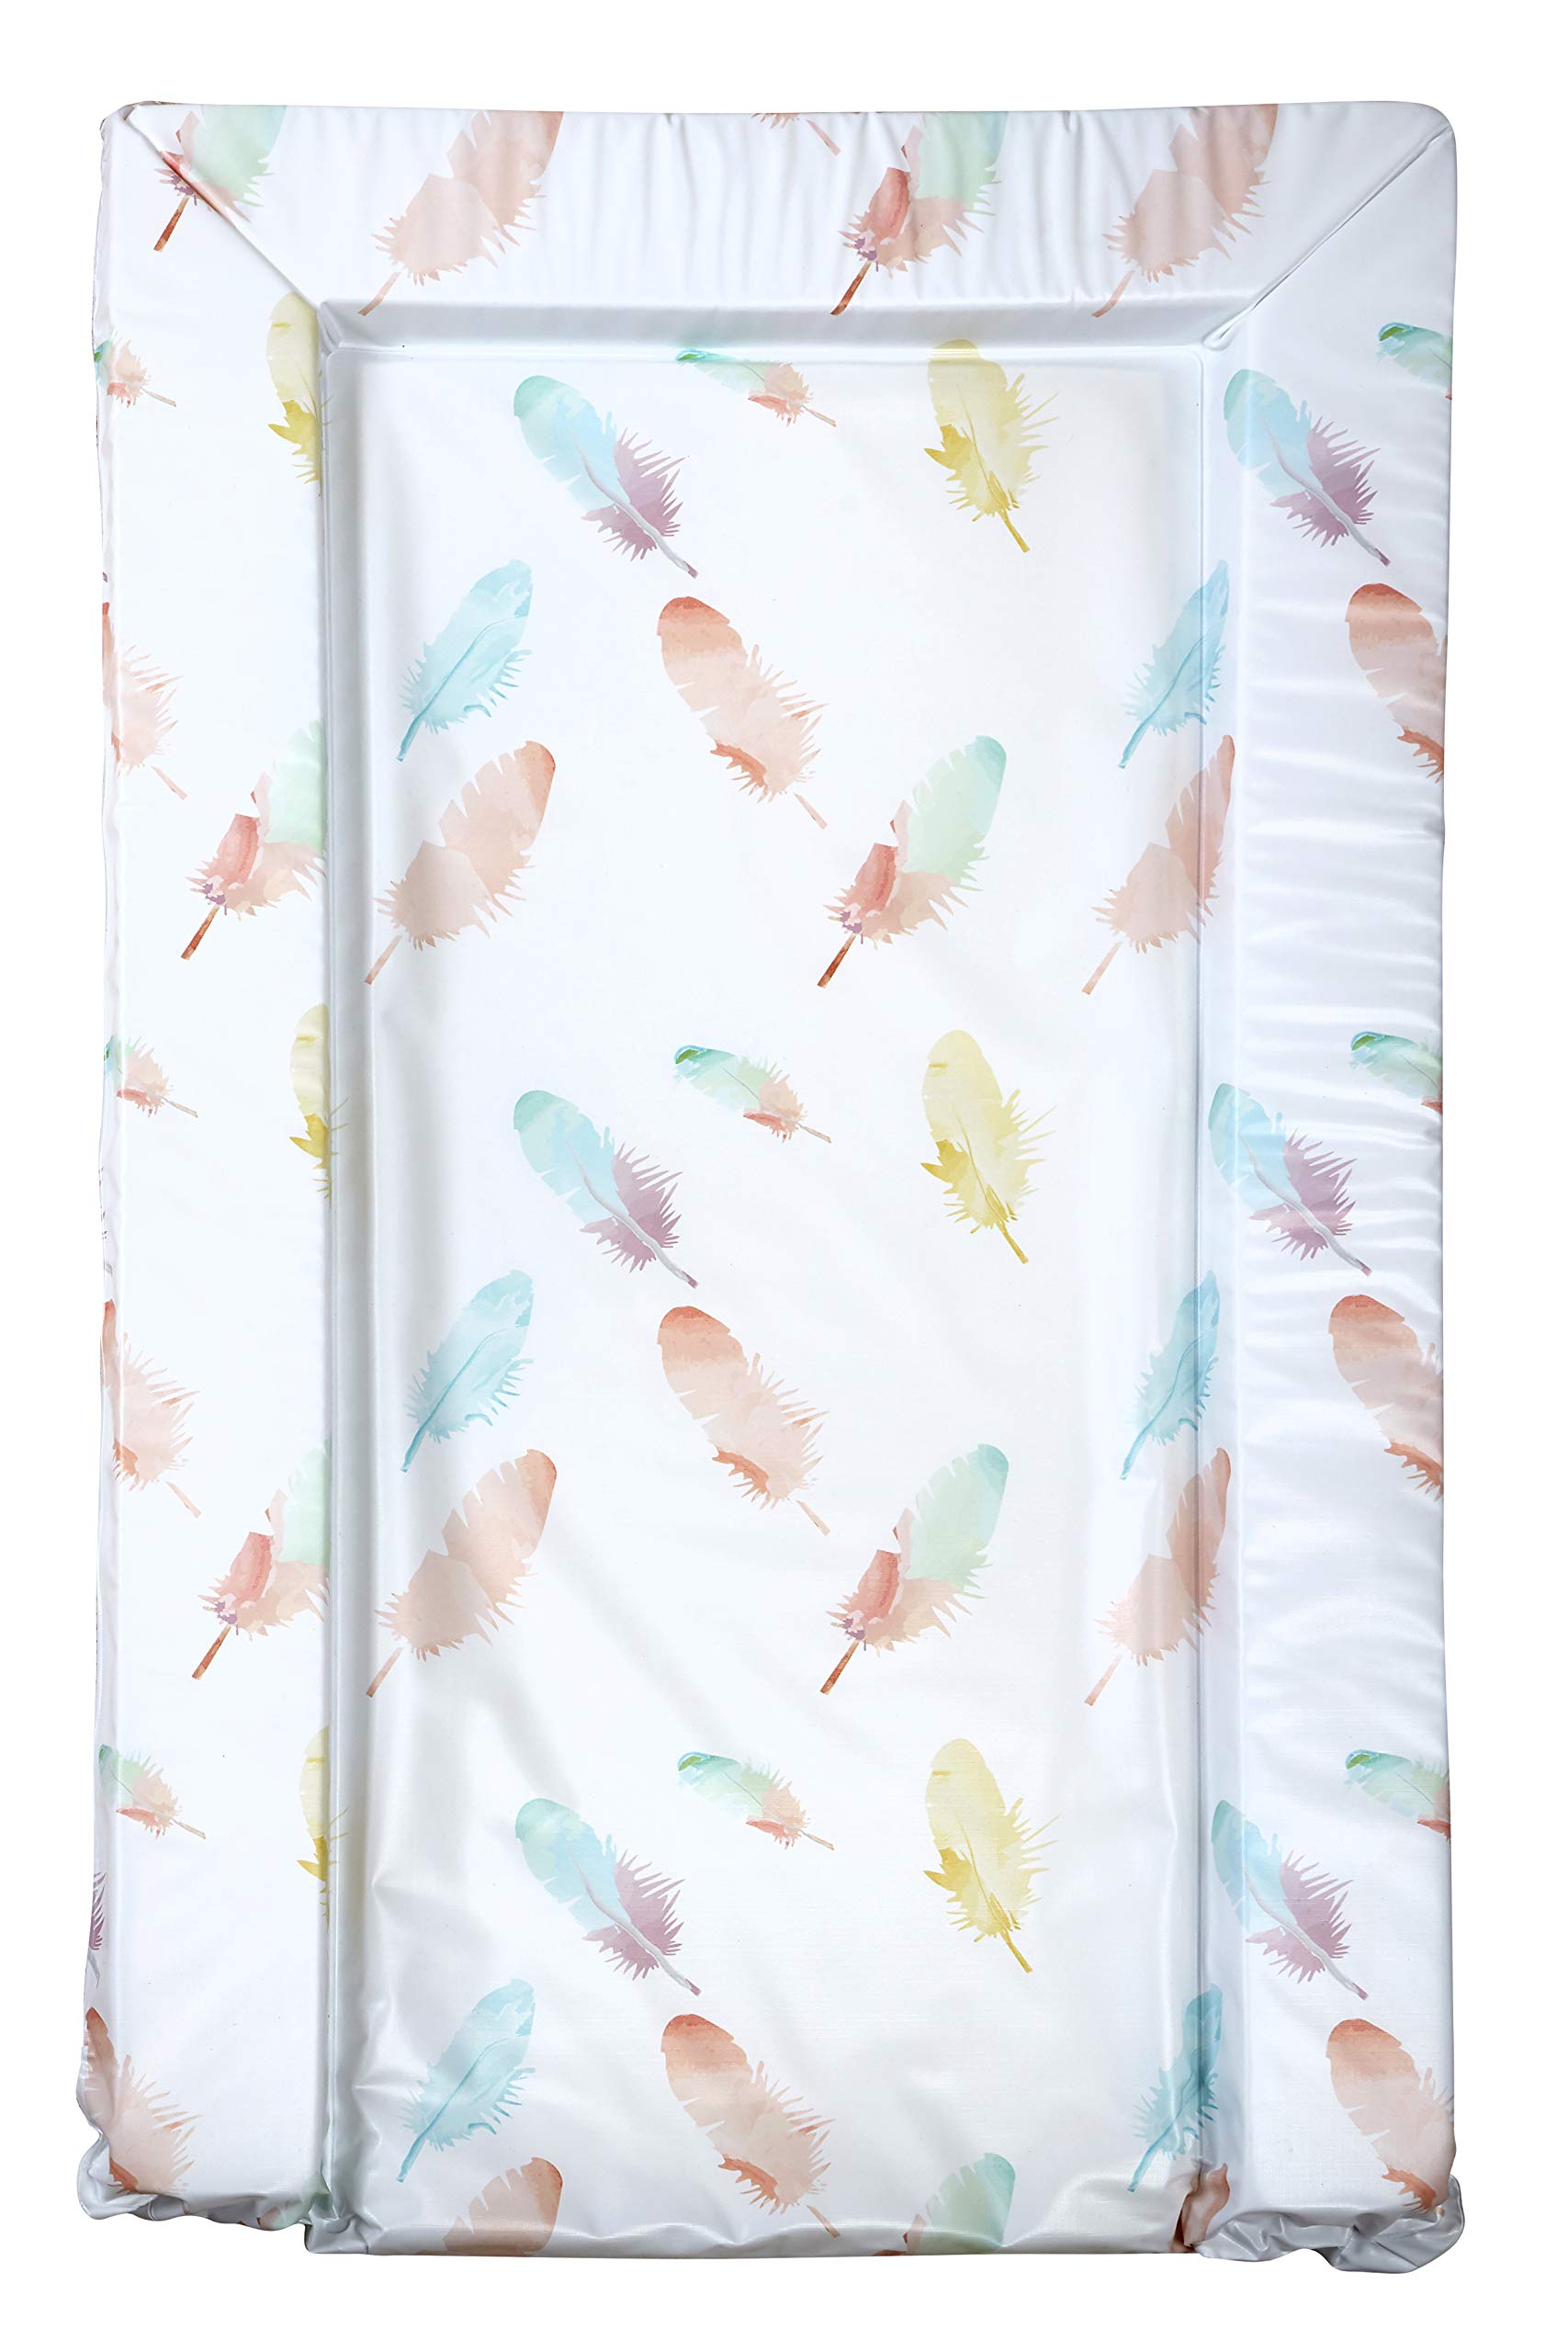 East Coast Nursery Ltd Feather Changing Mat, Coral and Mint